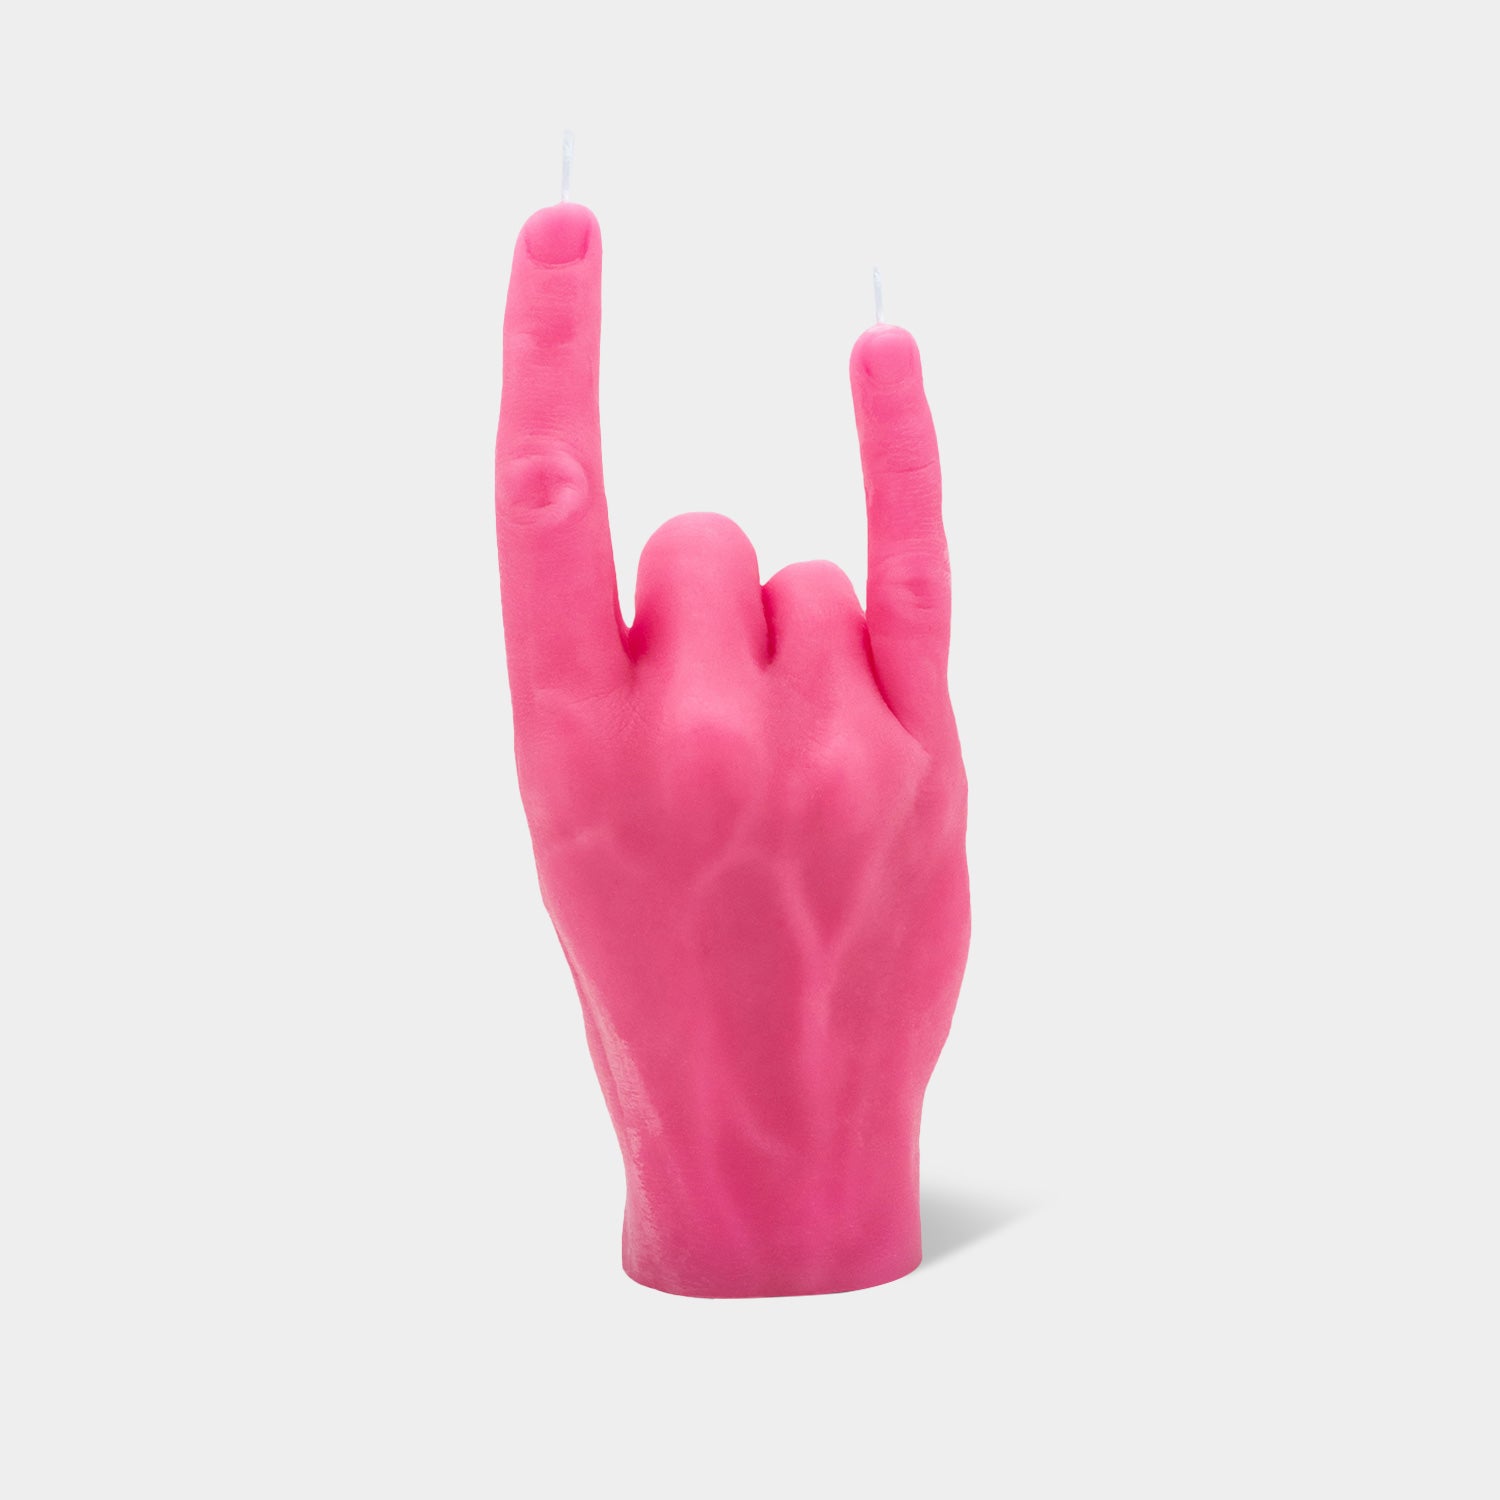 Pink Thing of The Day: Middle Finger Candle